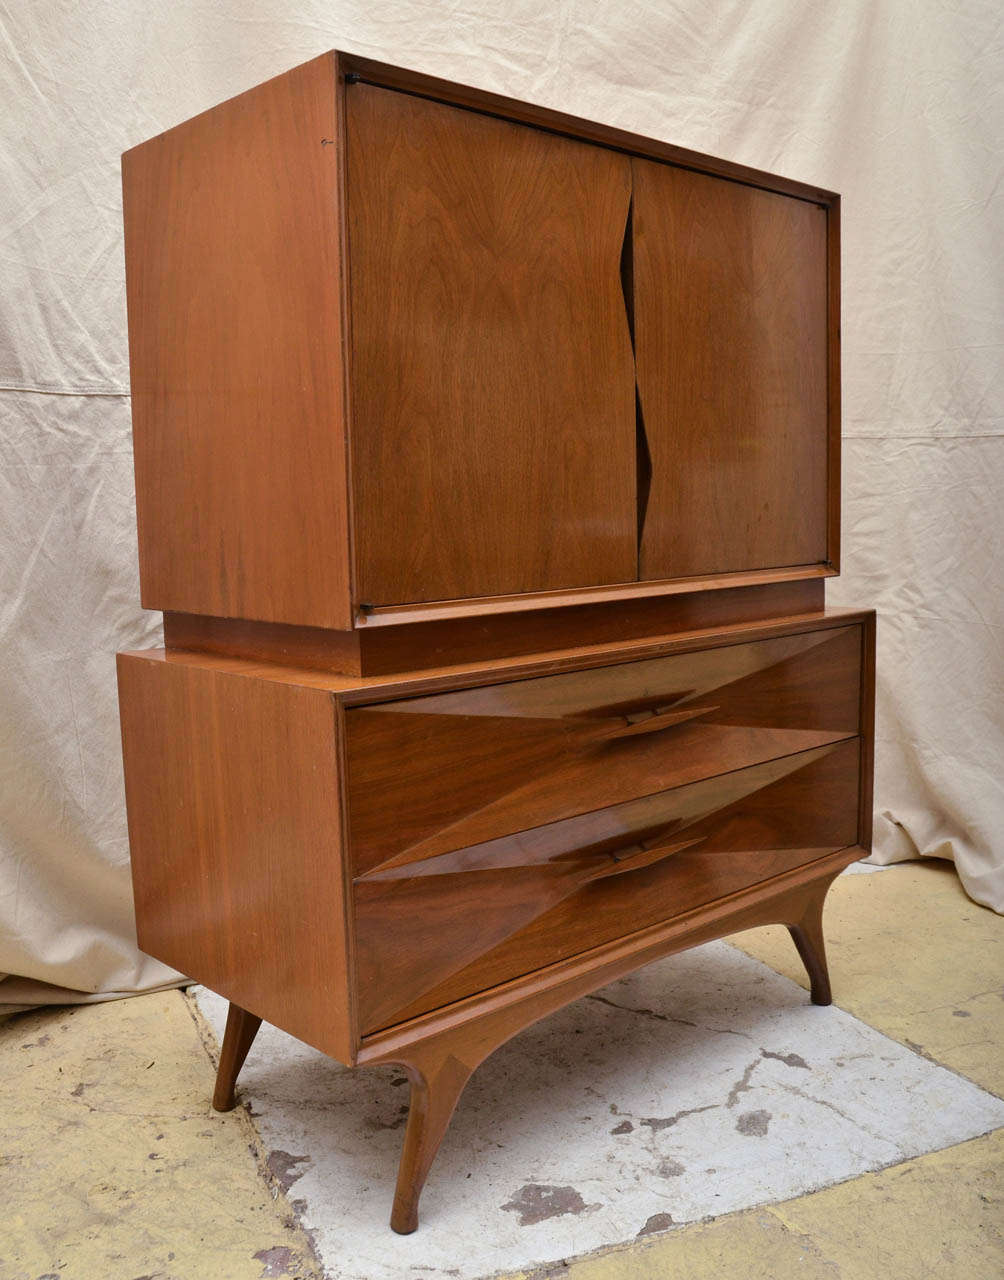 1960 Mid Century walnut two door cabinet with zig zag cut out that acts as door pulls.  Sitting on two drawer chest whose drawer fronts form an inverted pyramid design, centered by a narrow wooden pull. The chest is raised on four splayed legs. The